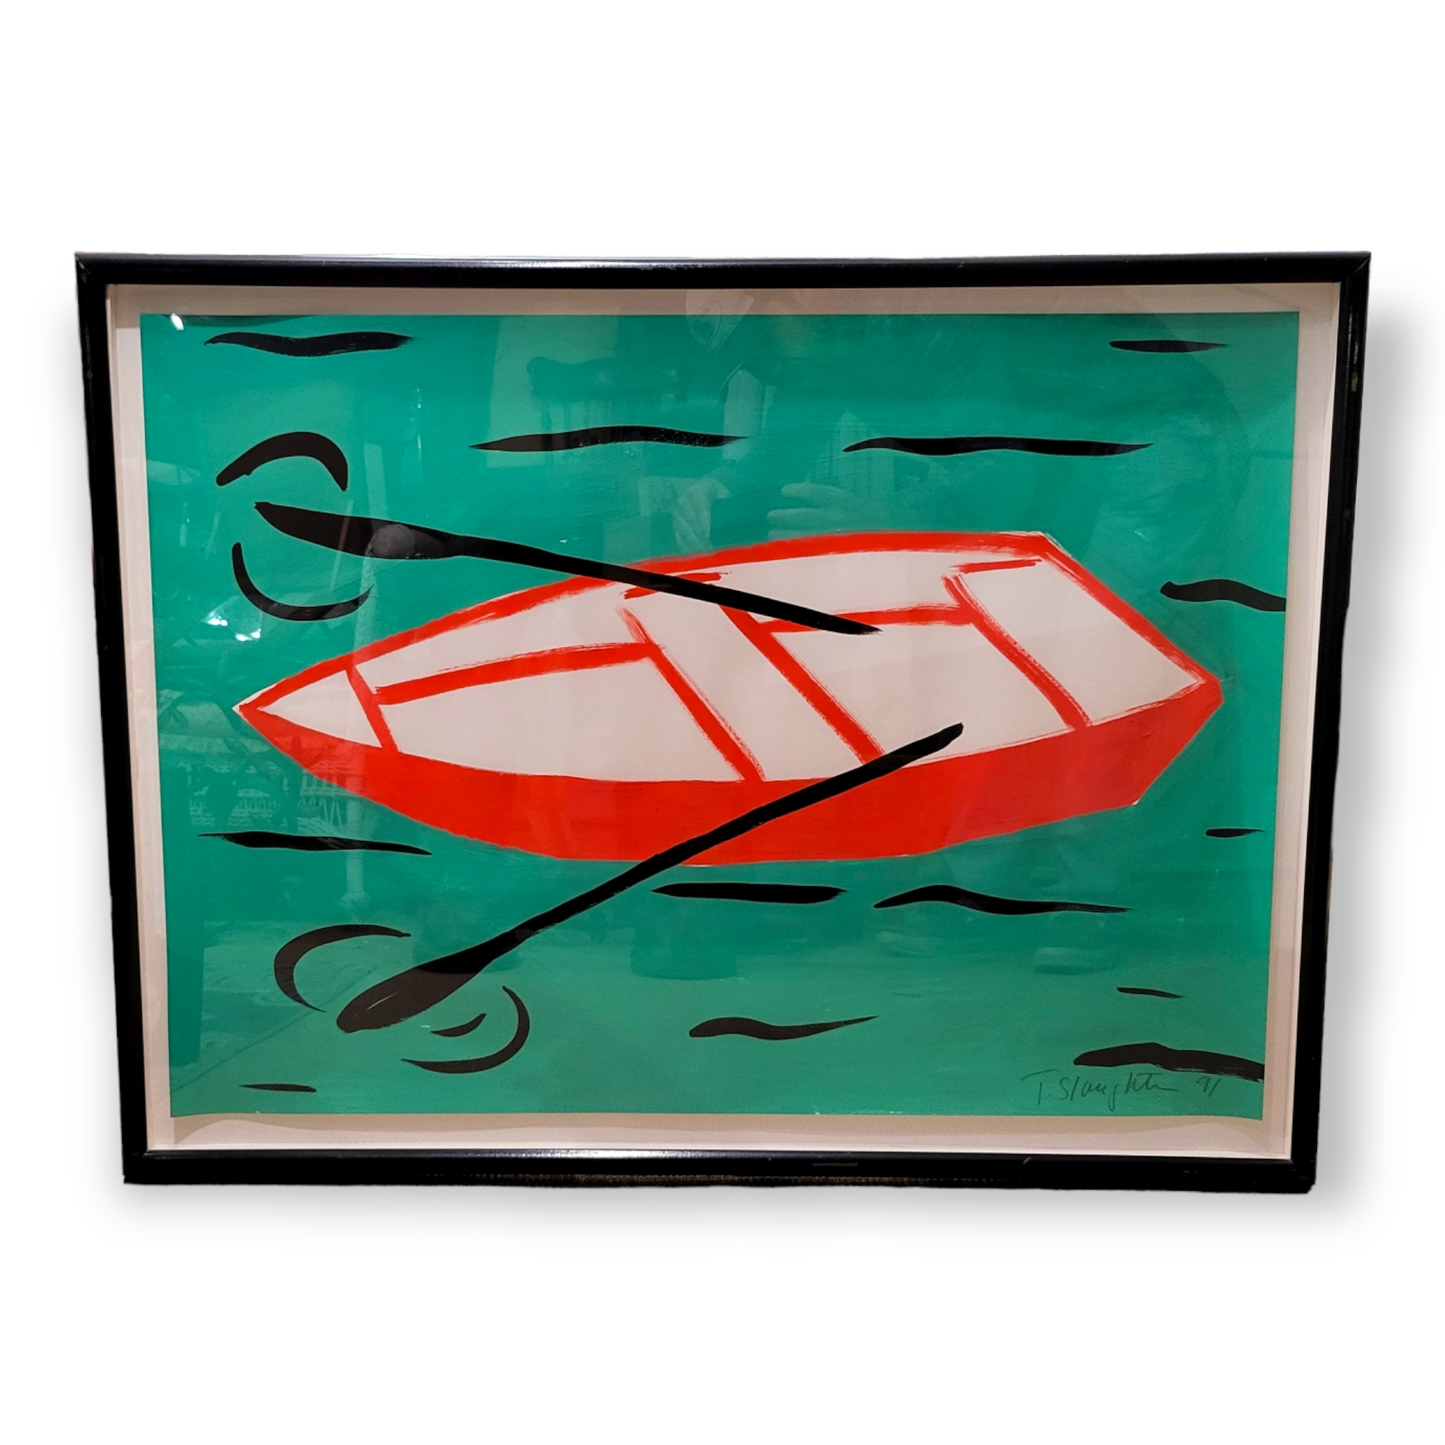 Tom Slaughter Untitled Gouache on Paper Painting of Boat with Oar's - Signed - 1991